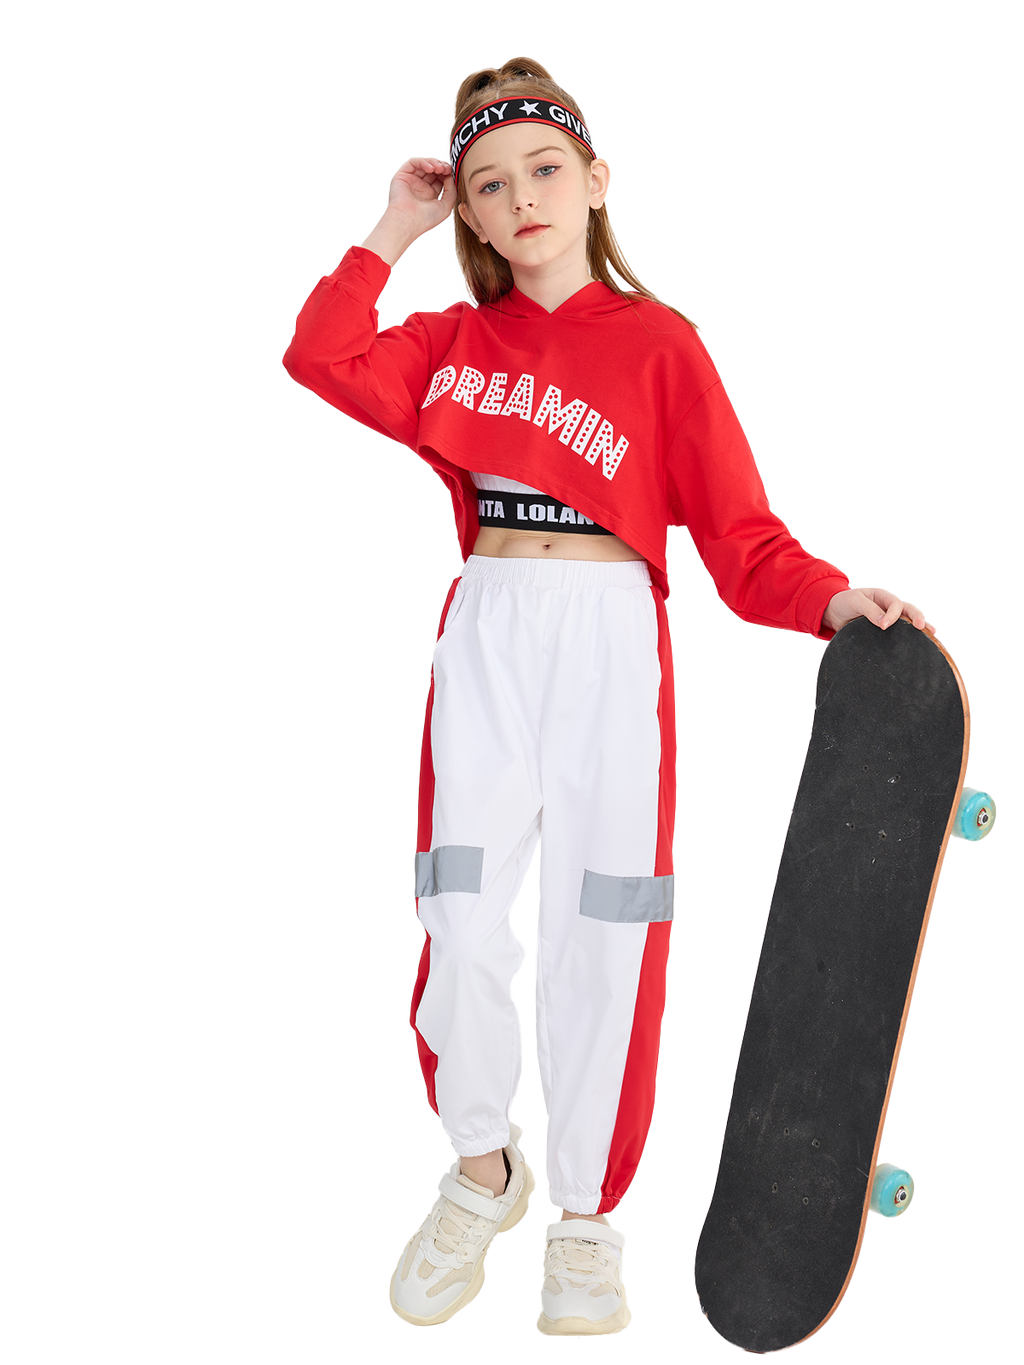  LOLANTA Girls 3 Piece Hip Hop Dance Outfits Long Sleeve Hoodies  Jazz Street Dance Clothes (red, 6-7): Clothing, Shoes & Jewelry